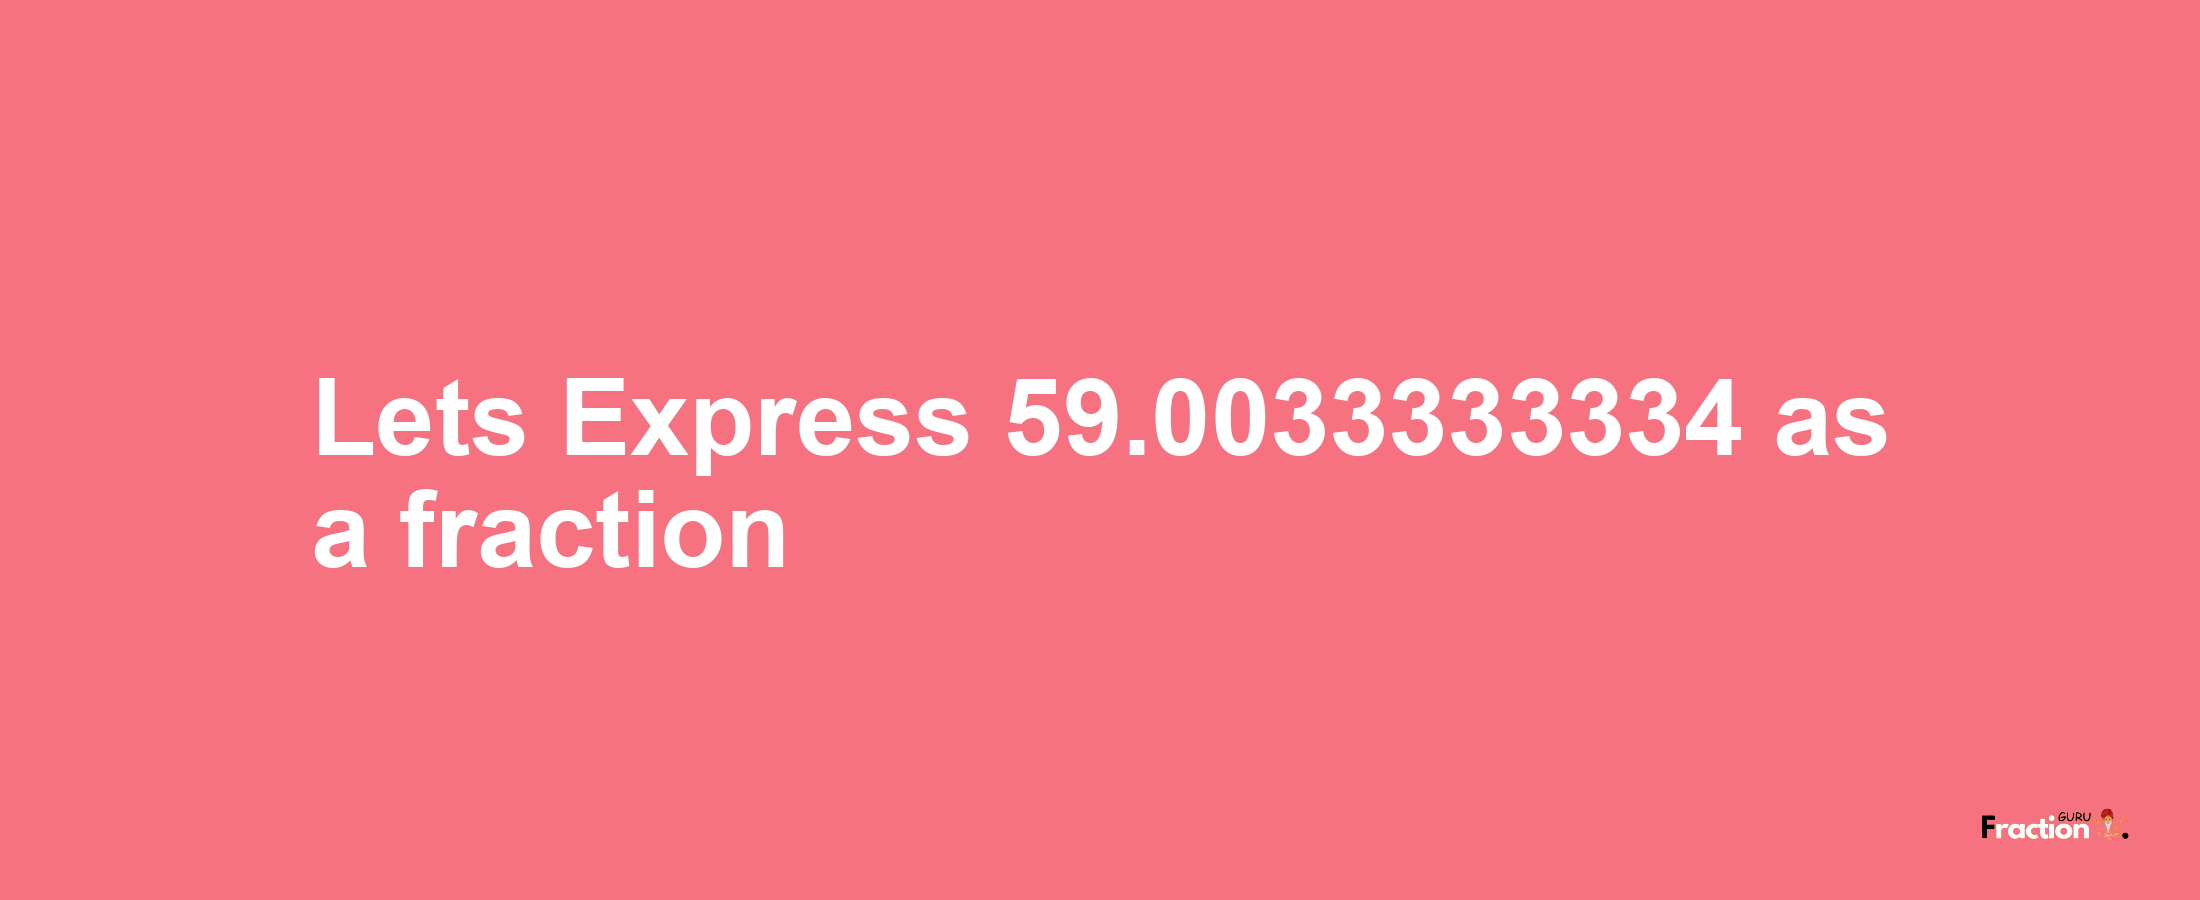 Lets Express 59.0033333334 as afraction